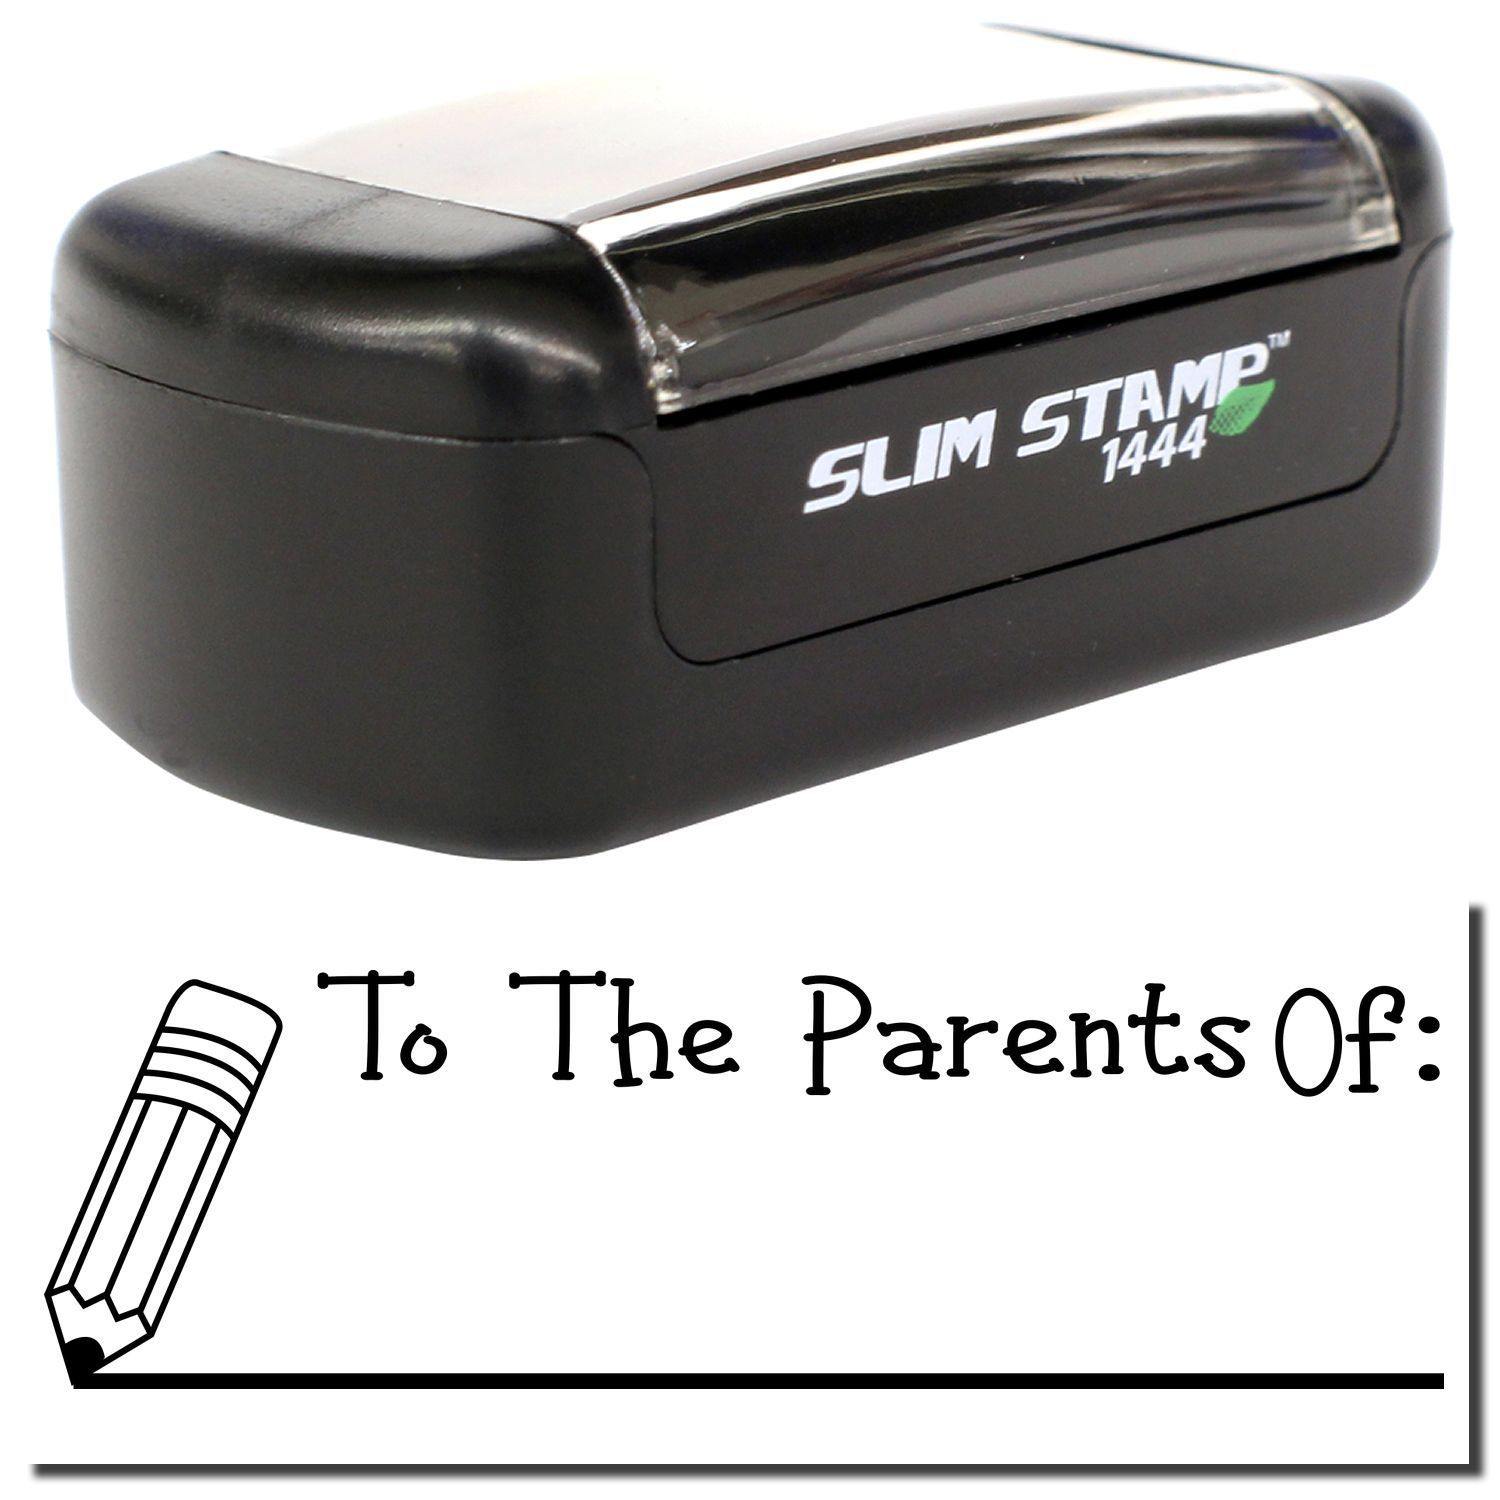 Slim Pre-Inked To The Parents Of with Line Stamp Main Image